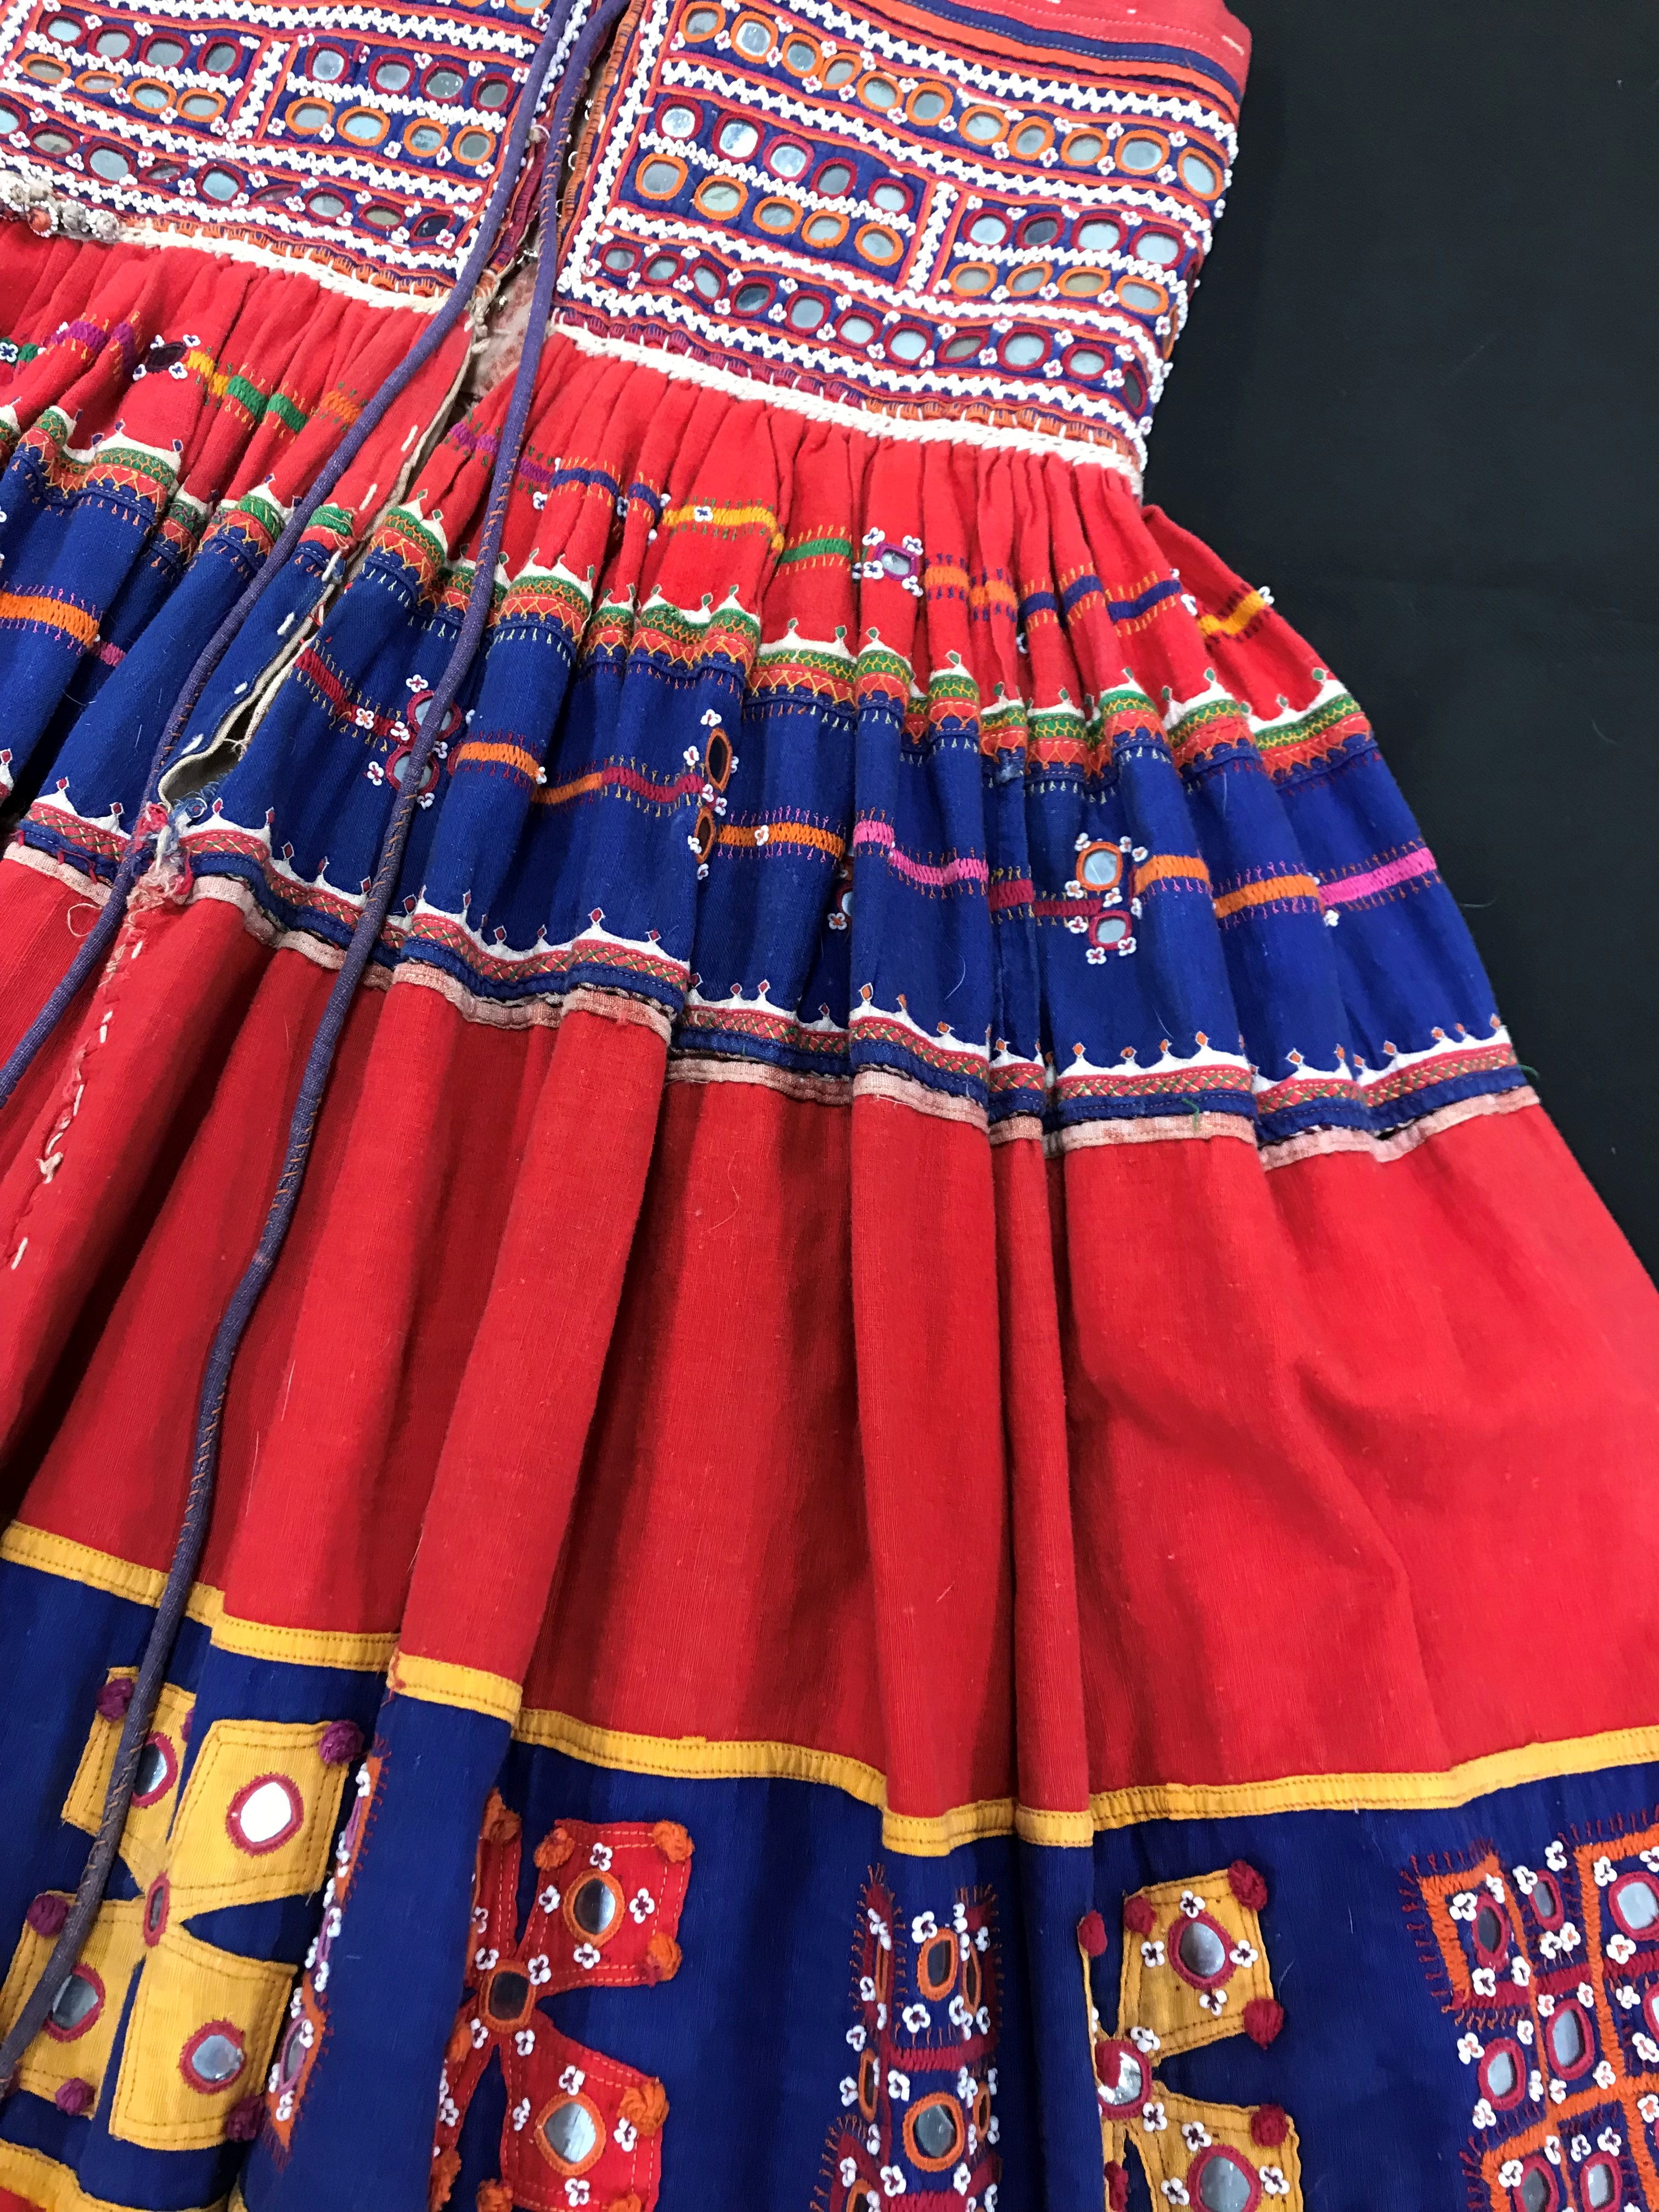 A Rajhistani skirt in red and blue stripes with overlaid embroidery and mirrored decorations, - Image 11 of 14